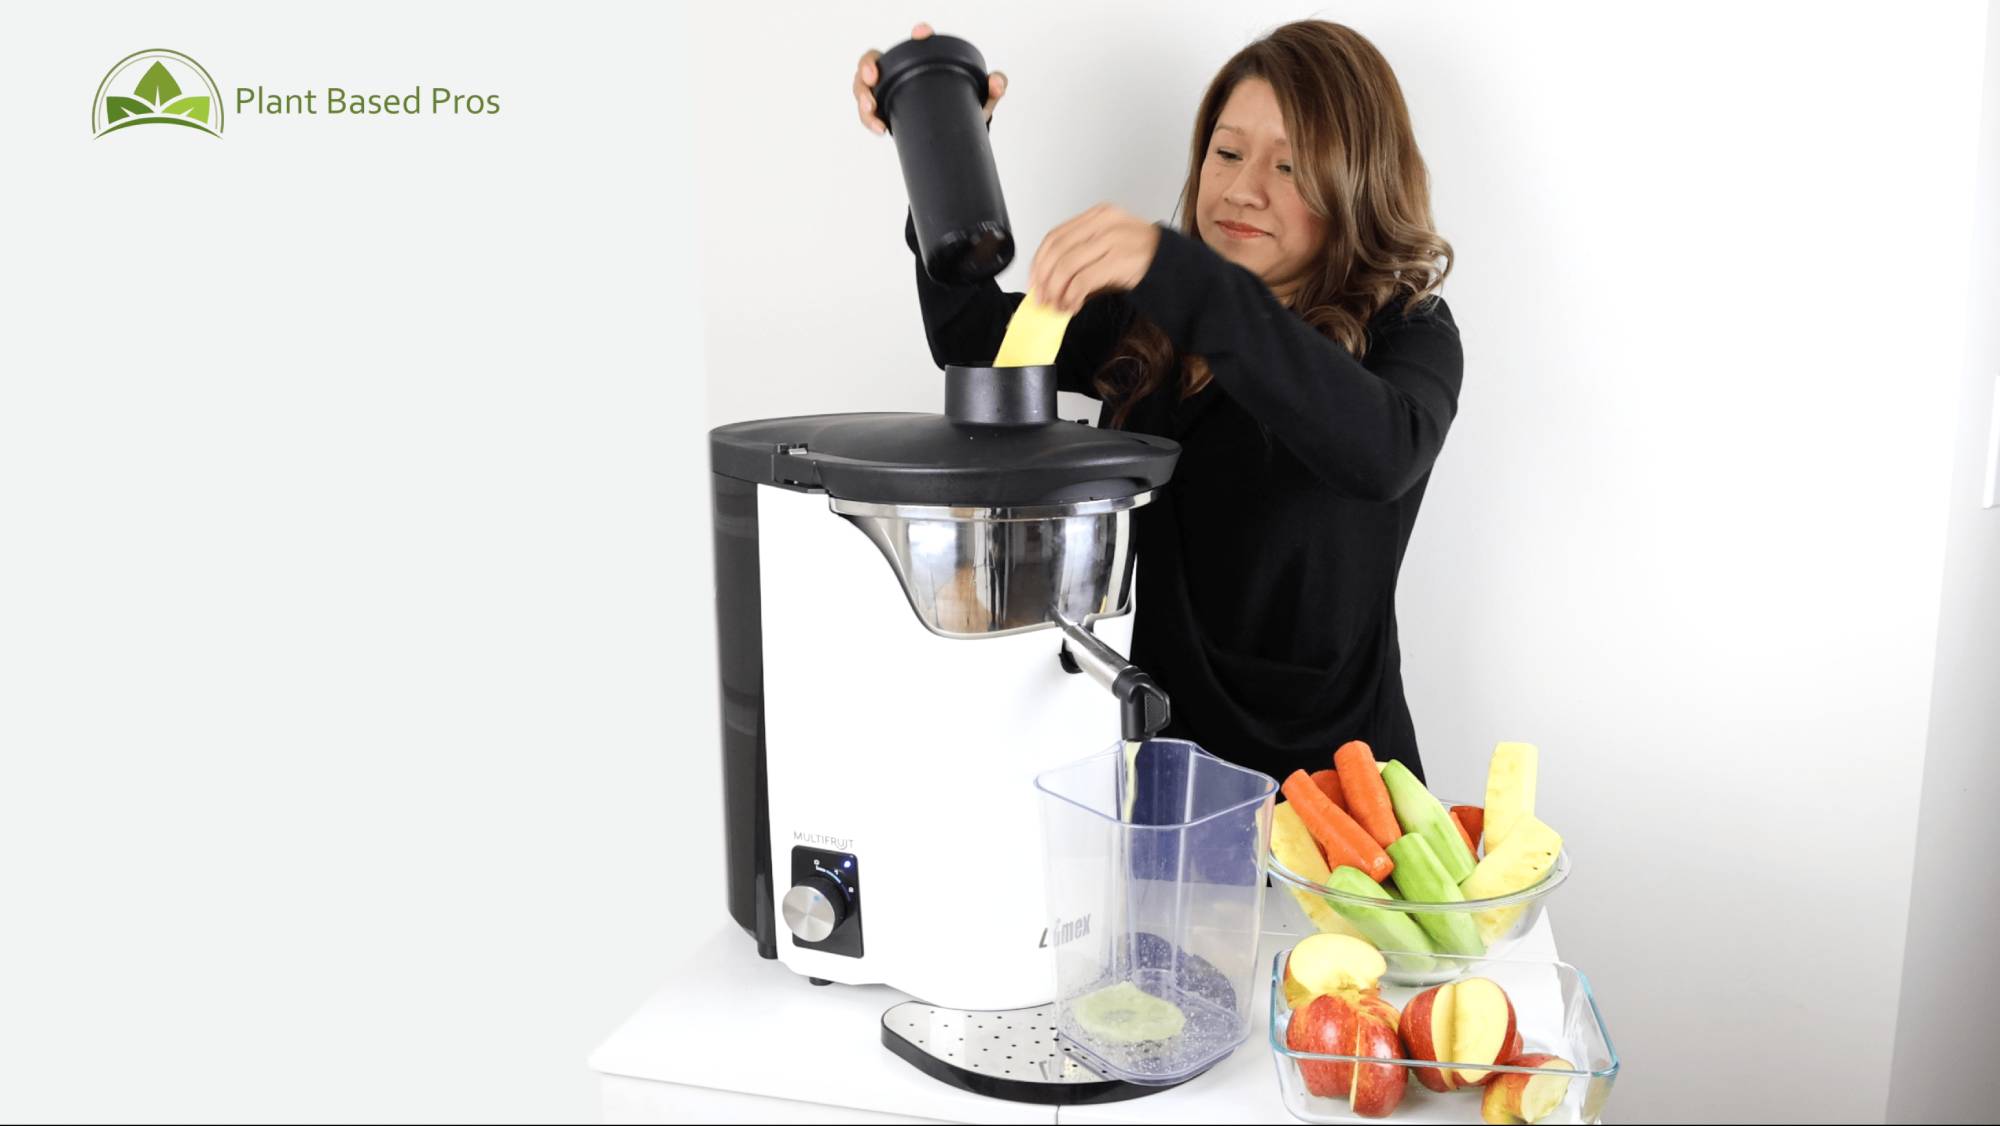 Zumex Multifruit Commercial Juicer Review – Great Juicer for Restaurants, Juice Bars, and Cafes